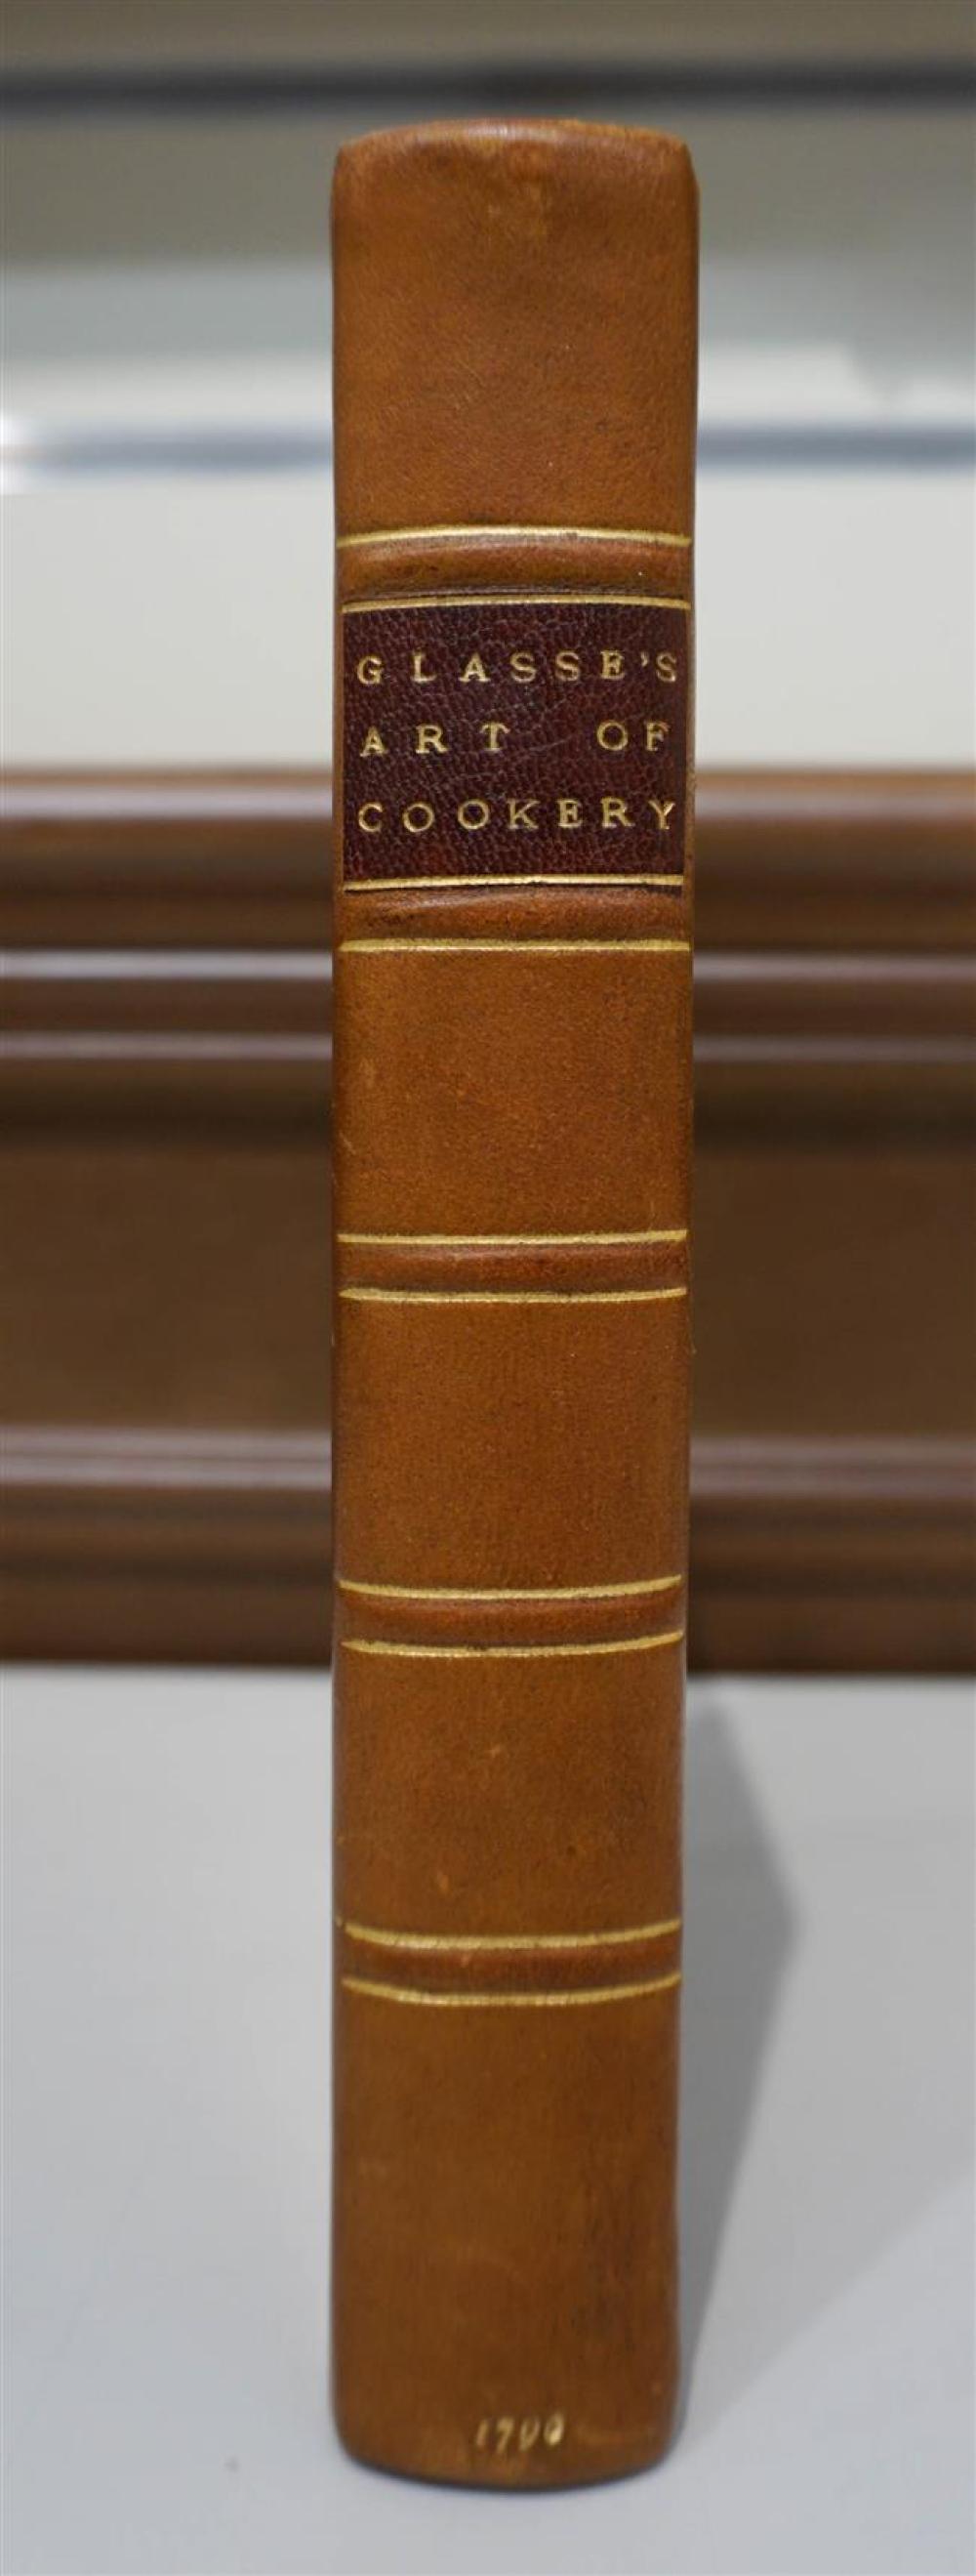 GLASSE S THE ART OF COOKERY LONDON 322923